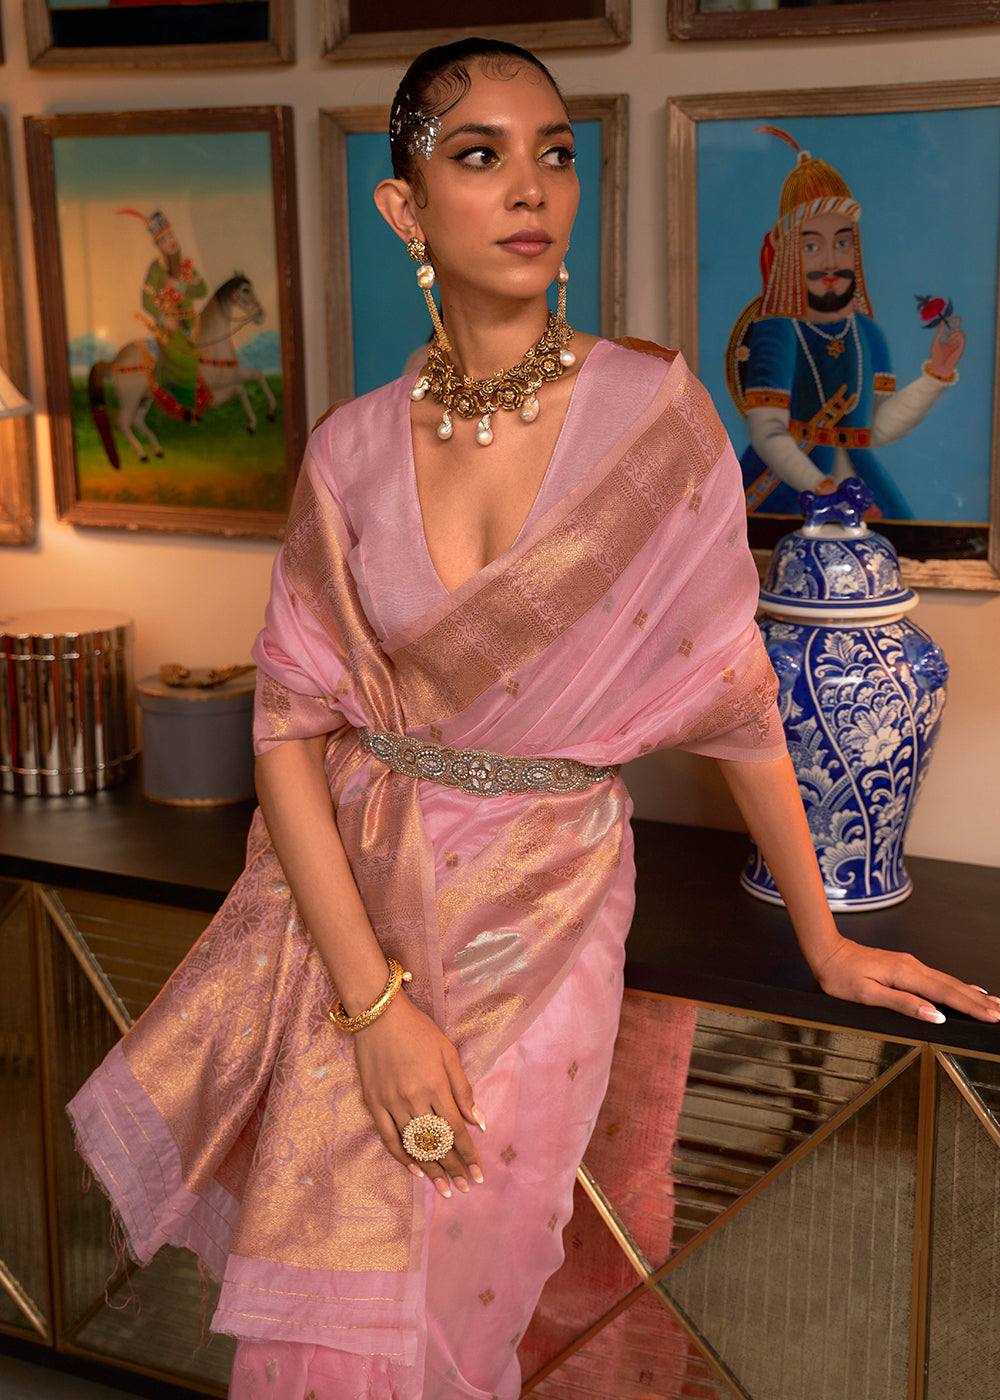 Buy Now Crystal Pink Blended Woven Zari Organza Silk Saree Online in USA, UK, Canada & Worldwide at Empress Clothing.